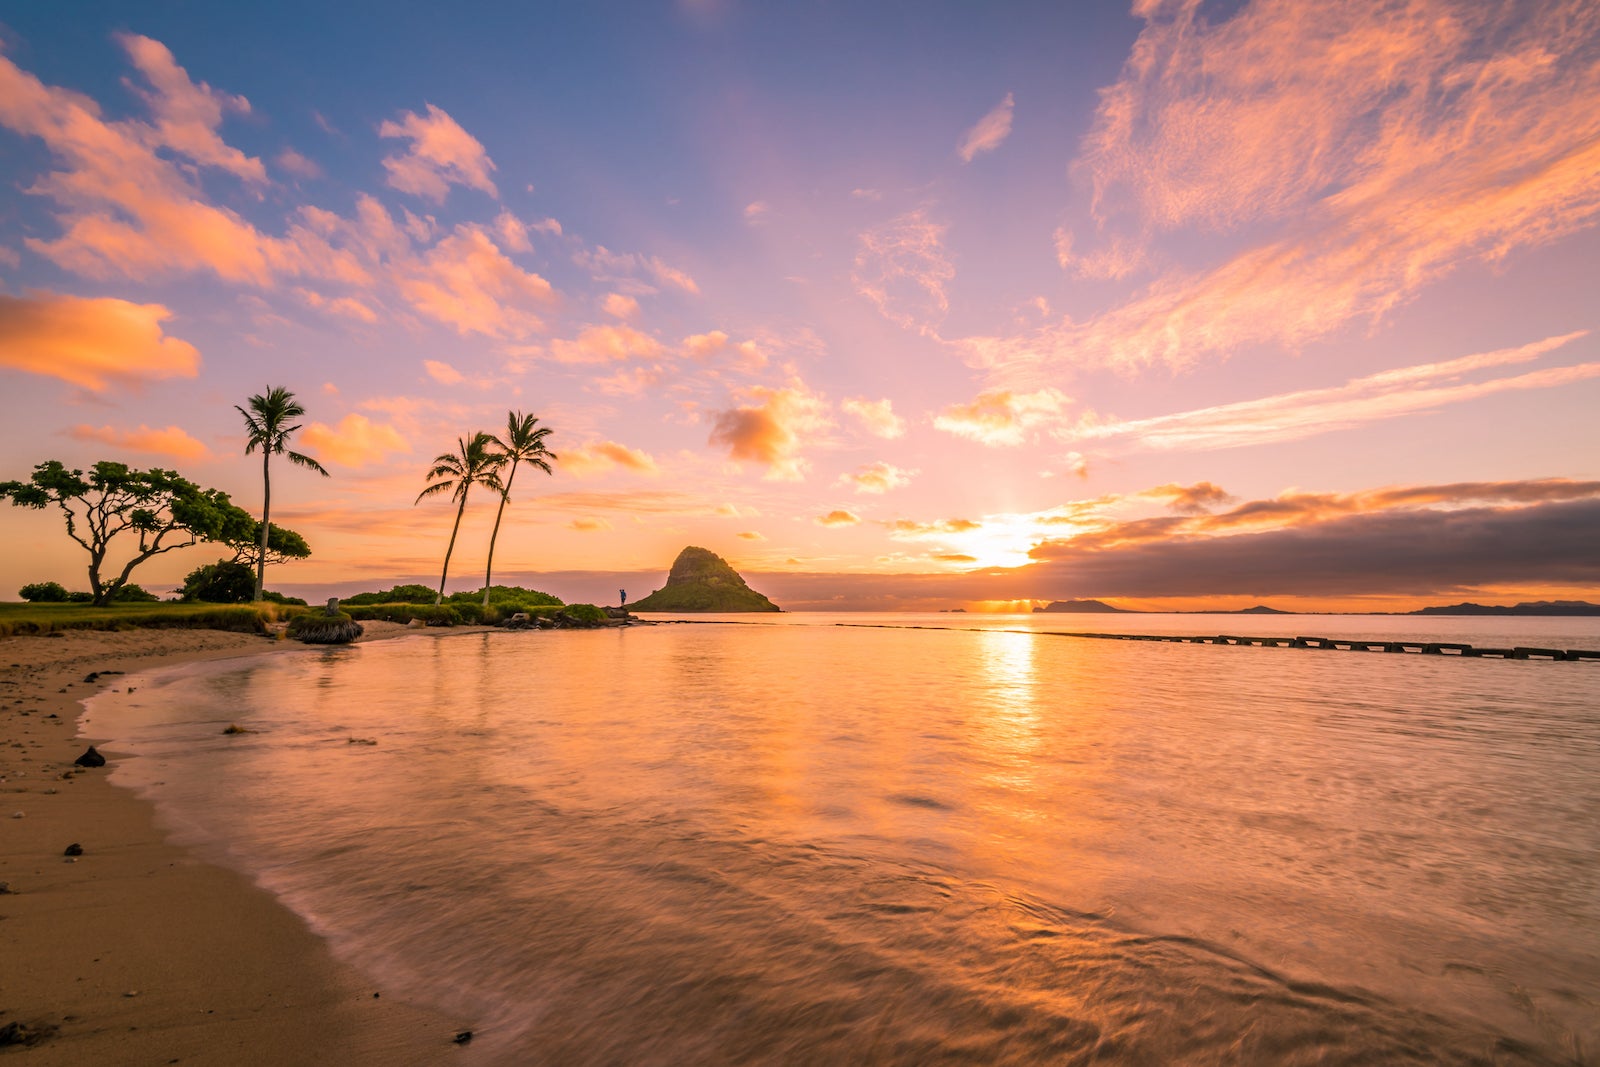 Fly to Hawaii from the West Coast for less than $300